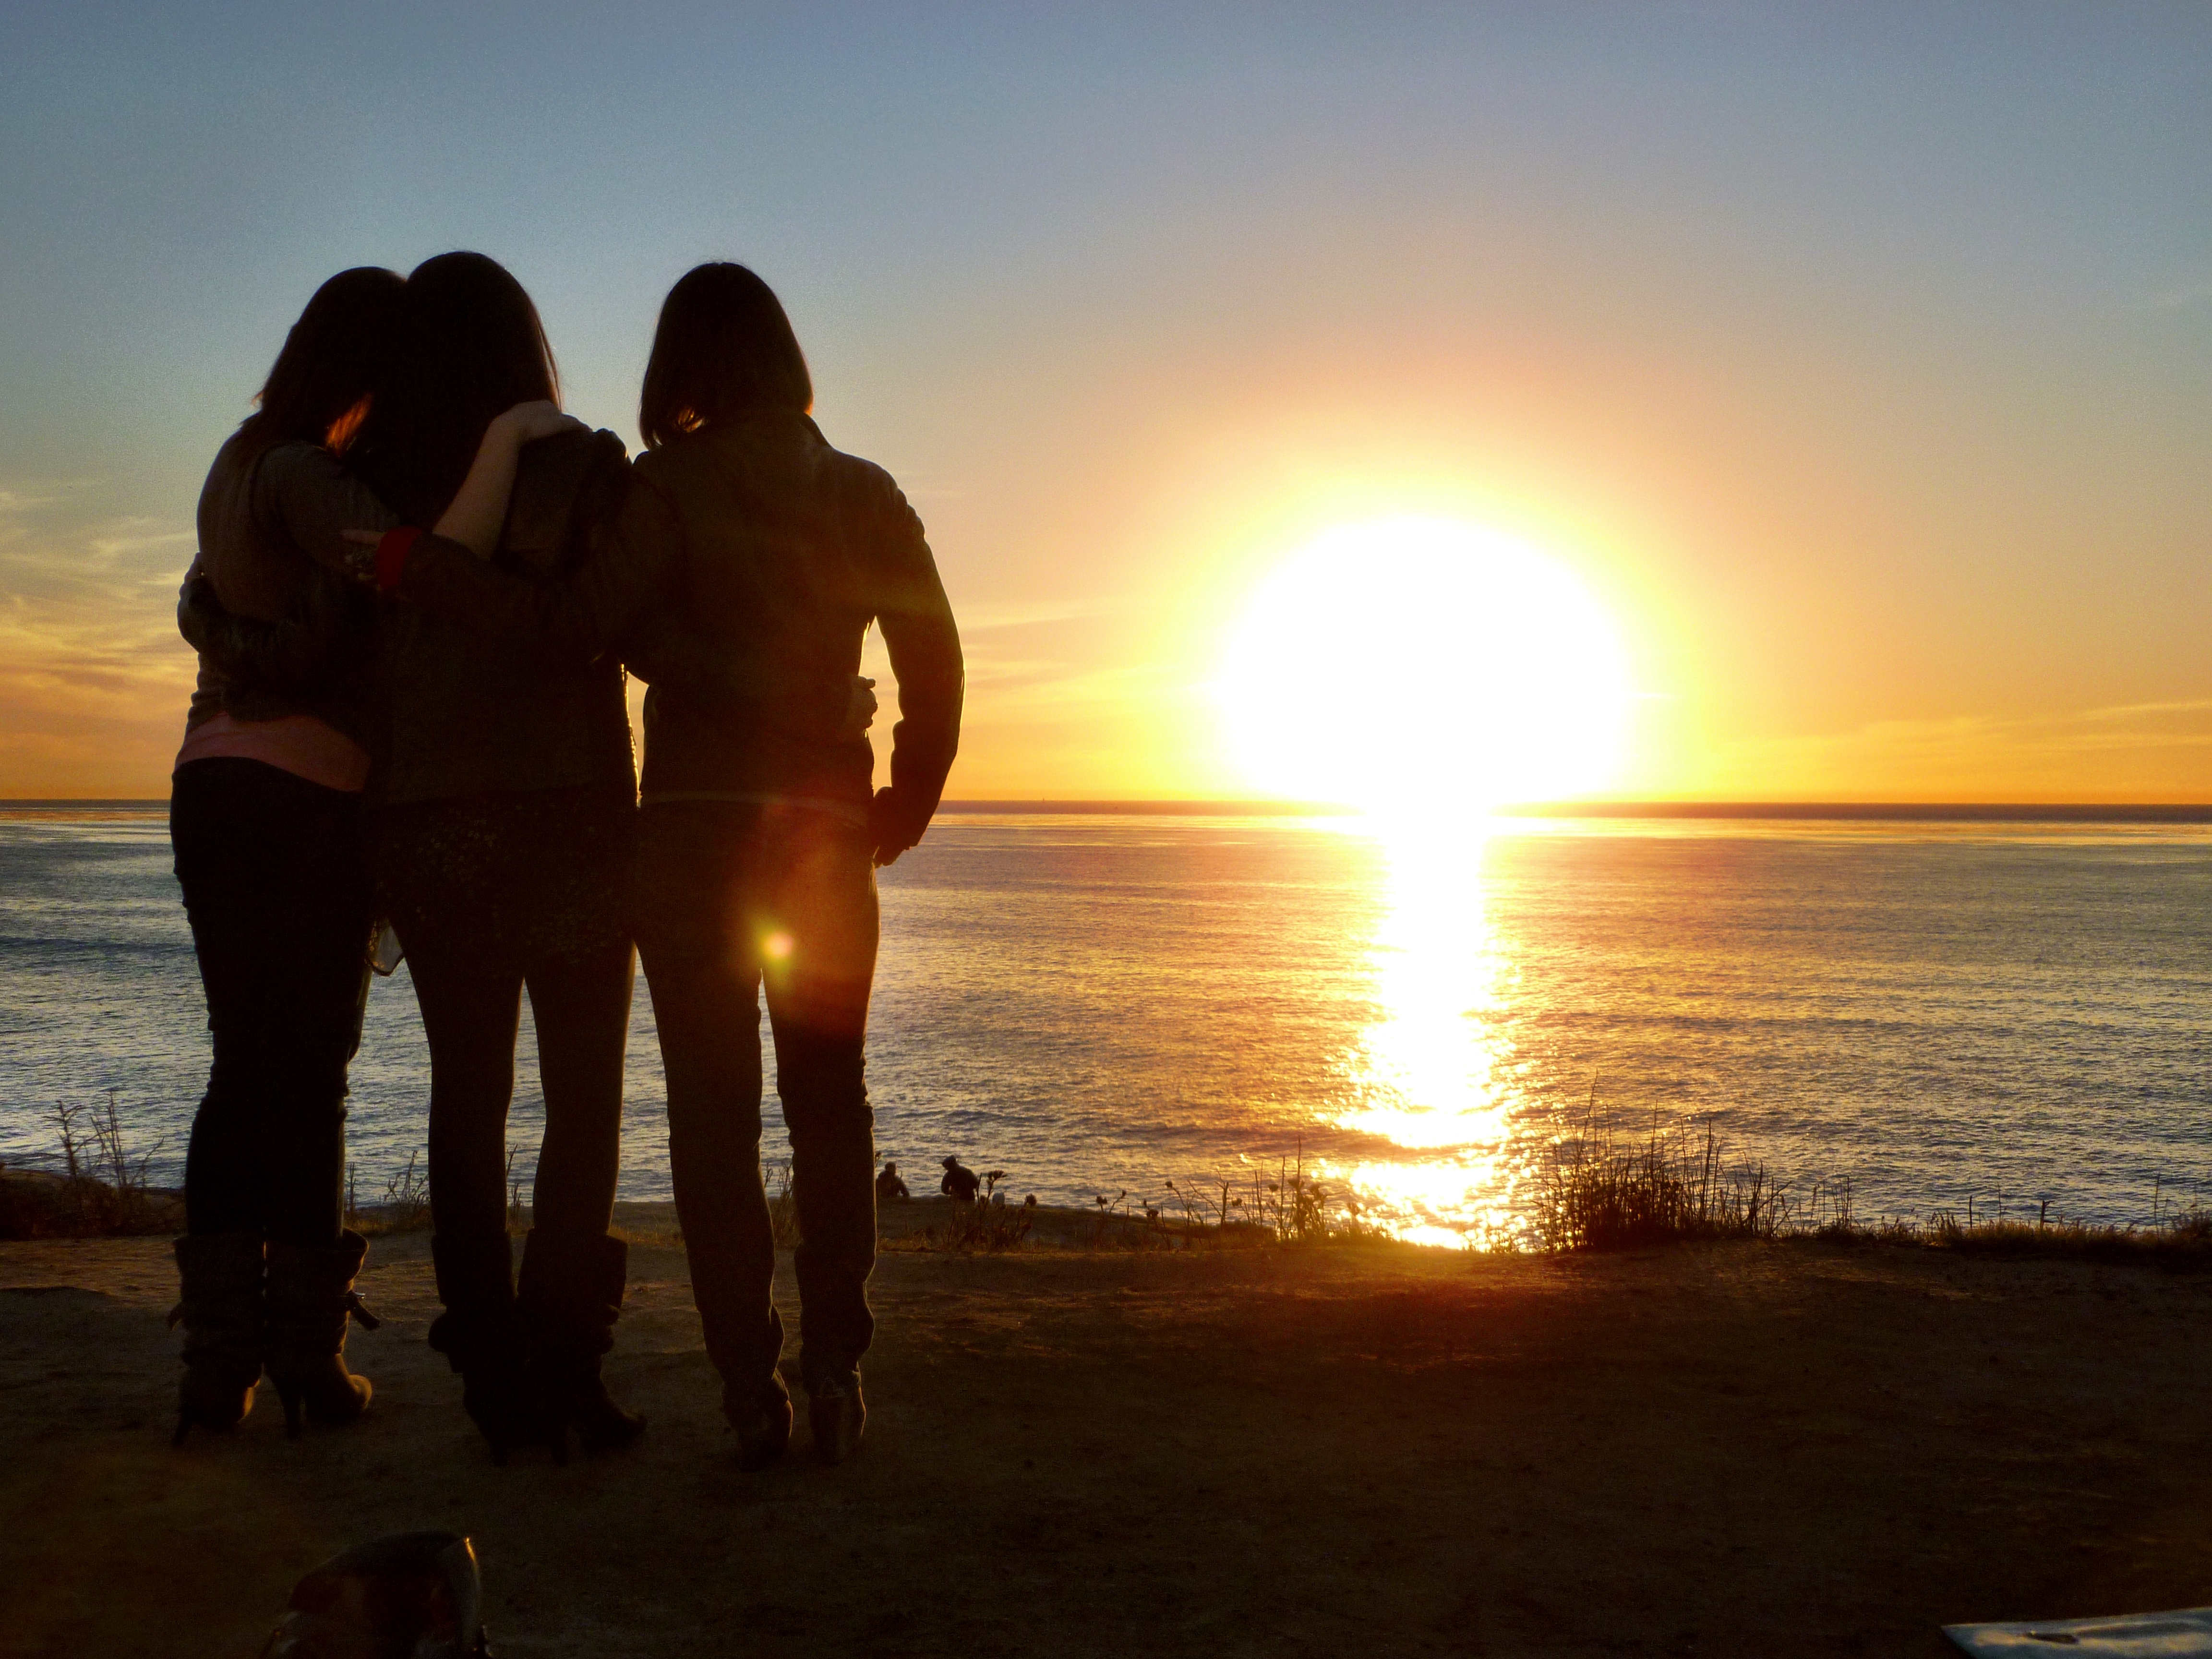 Watch the sunset from Sunset Cliffs in San Diego, California